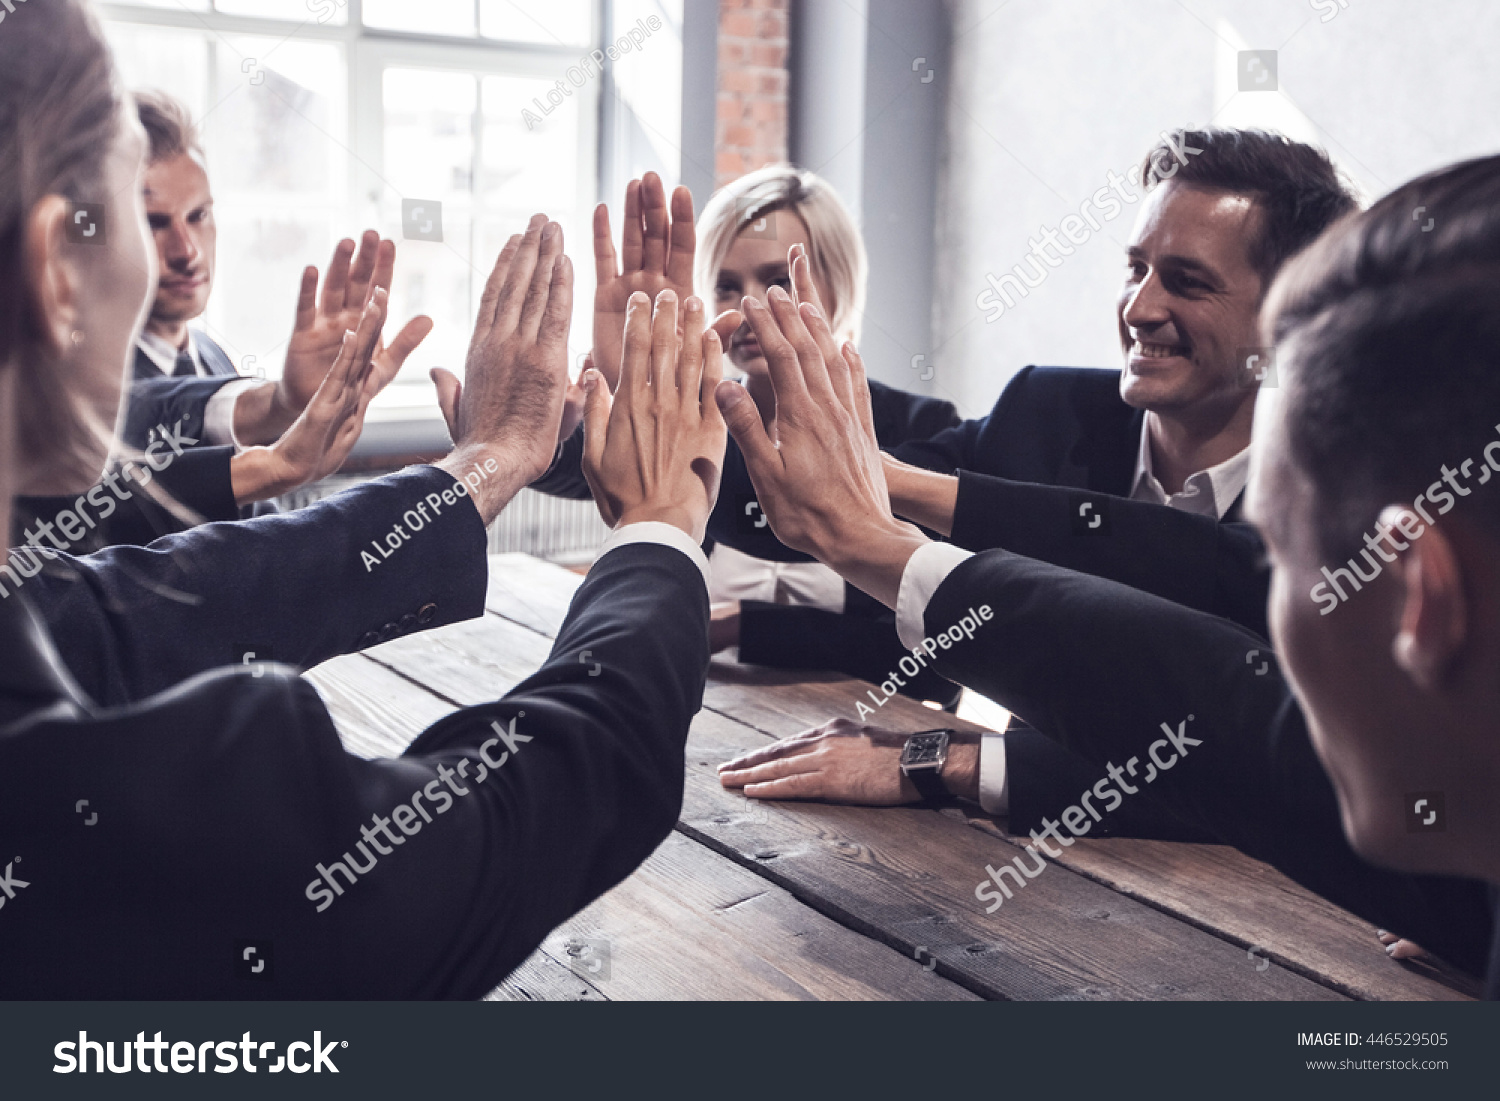 Business people give high five at business meeting #446529505